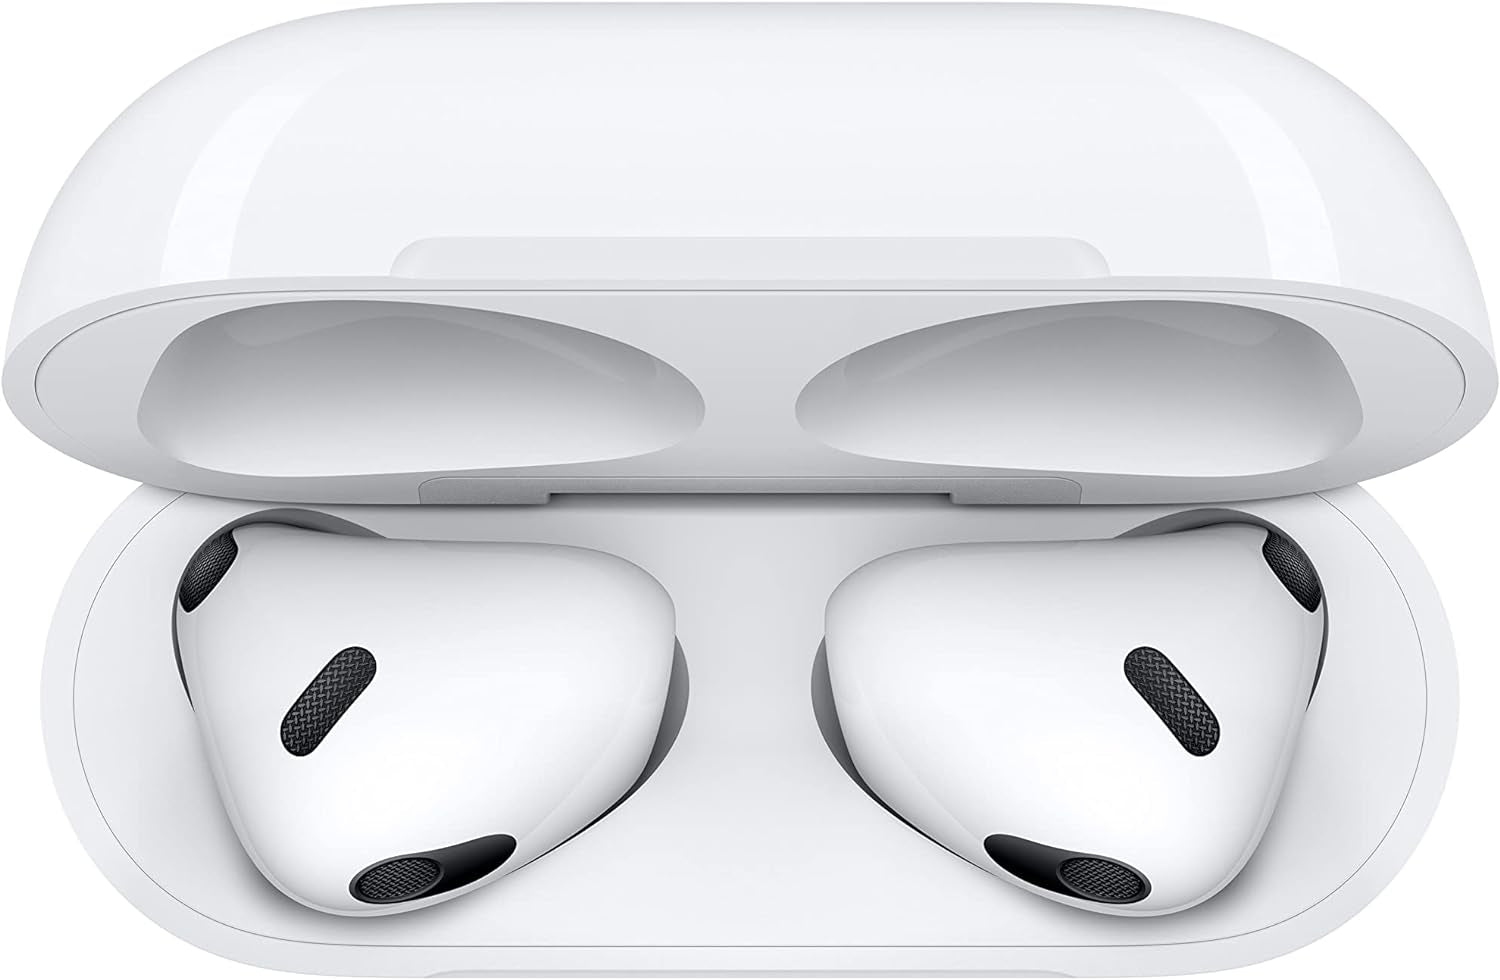 "Enhanced Airpods: 3rd Gen with Lightning Charging for Ultimate Convenience!"